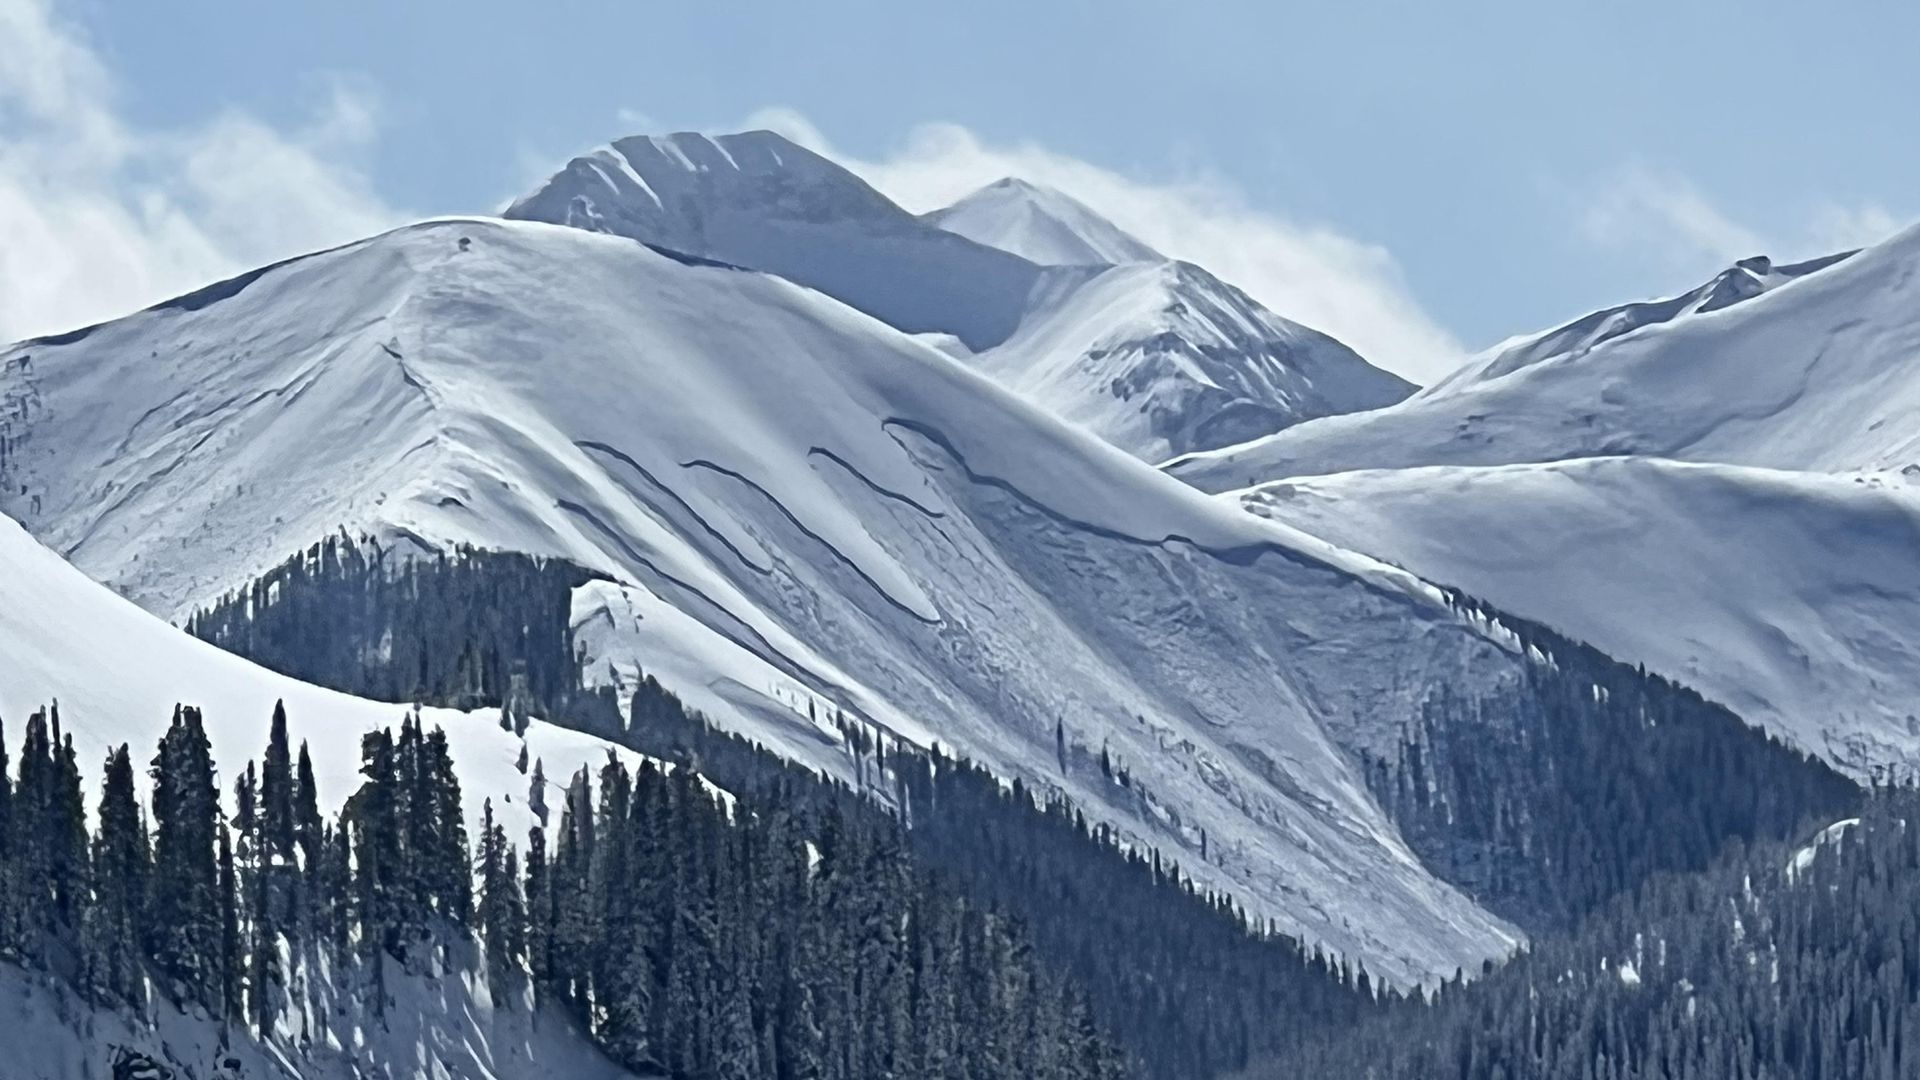 A natural avalanche Feb. 23 in the San Juan mountains. Photo courtesy of Byran Jarrett and CAIC.